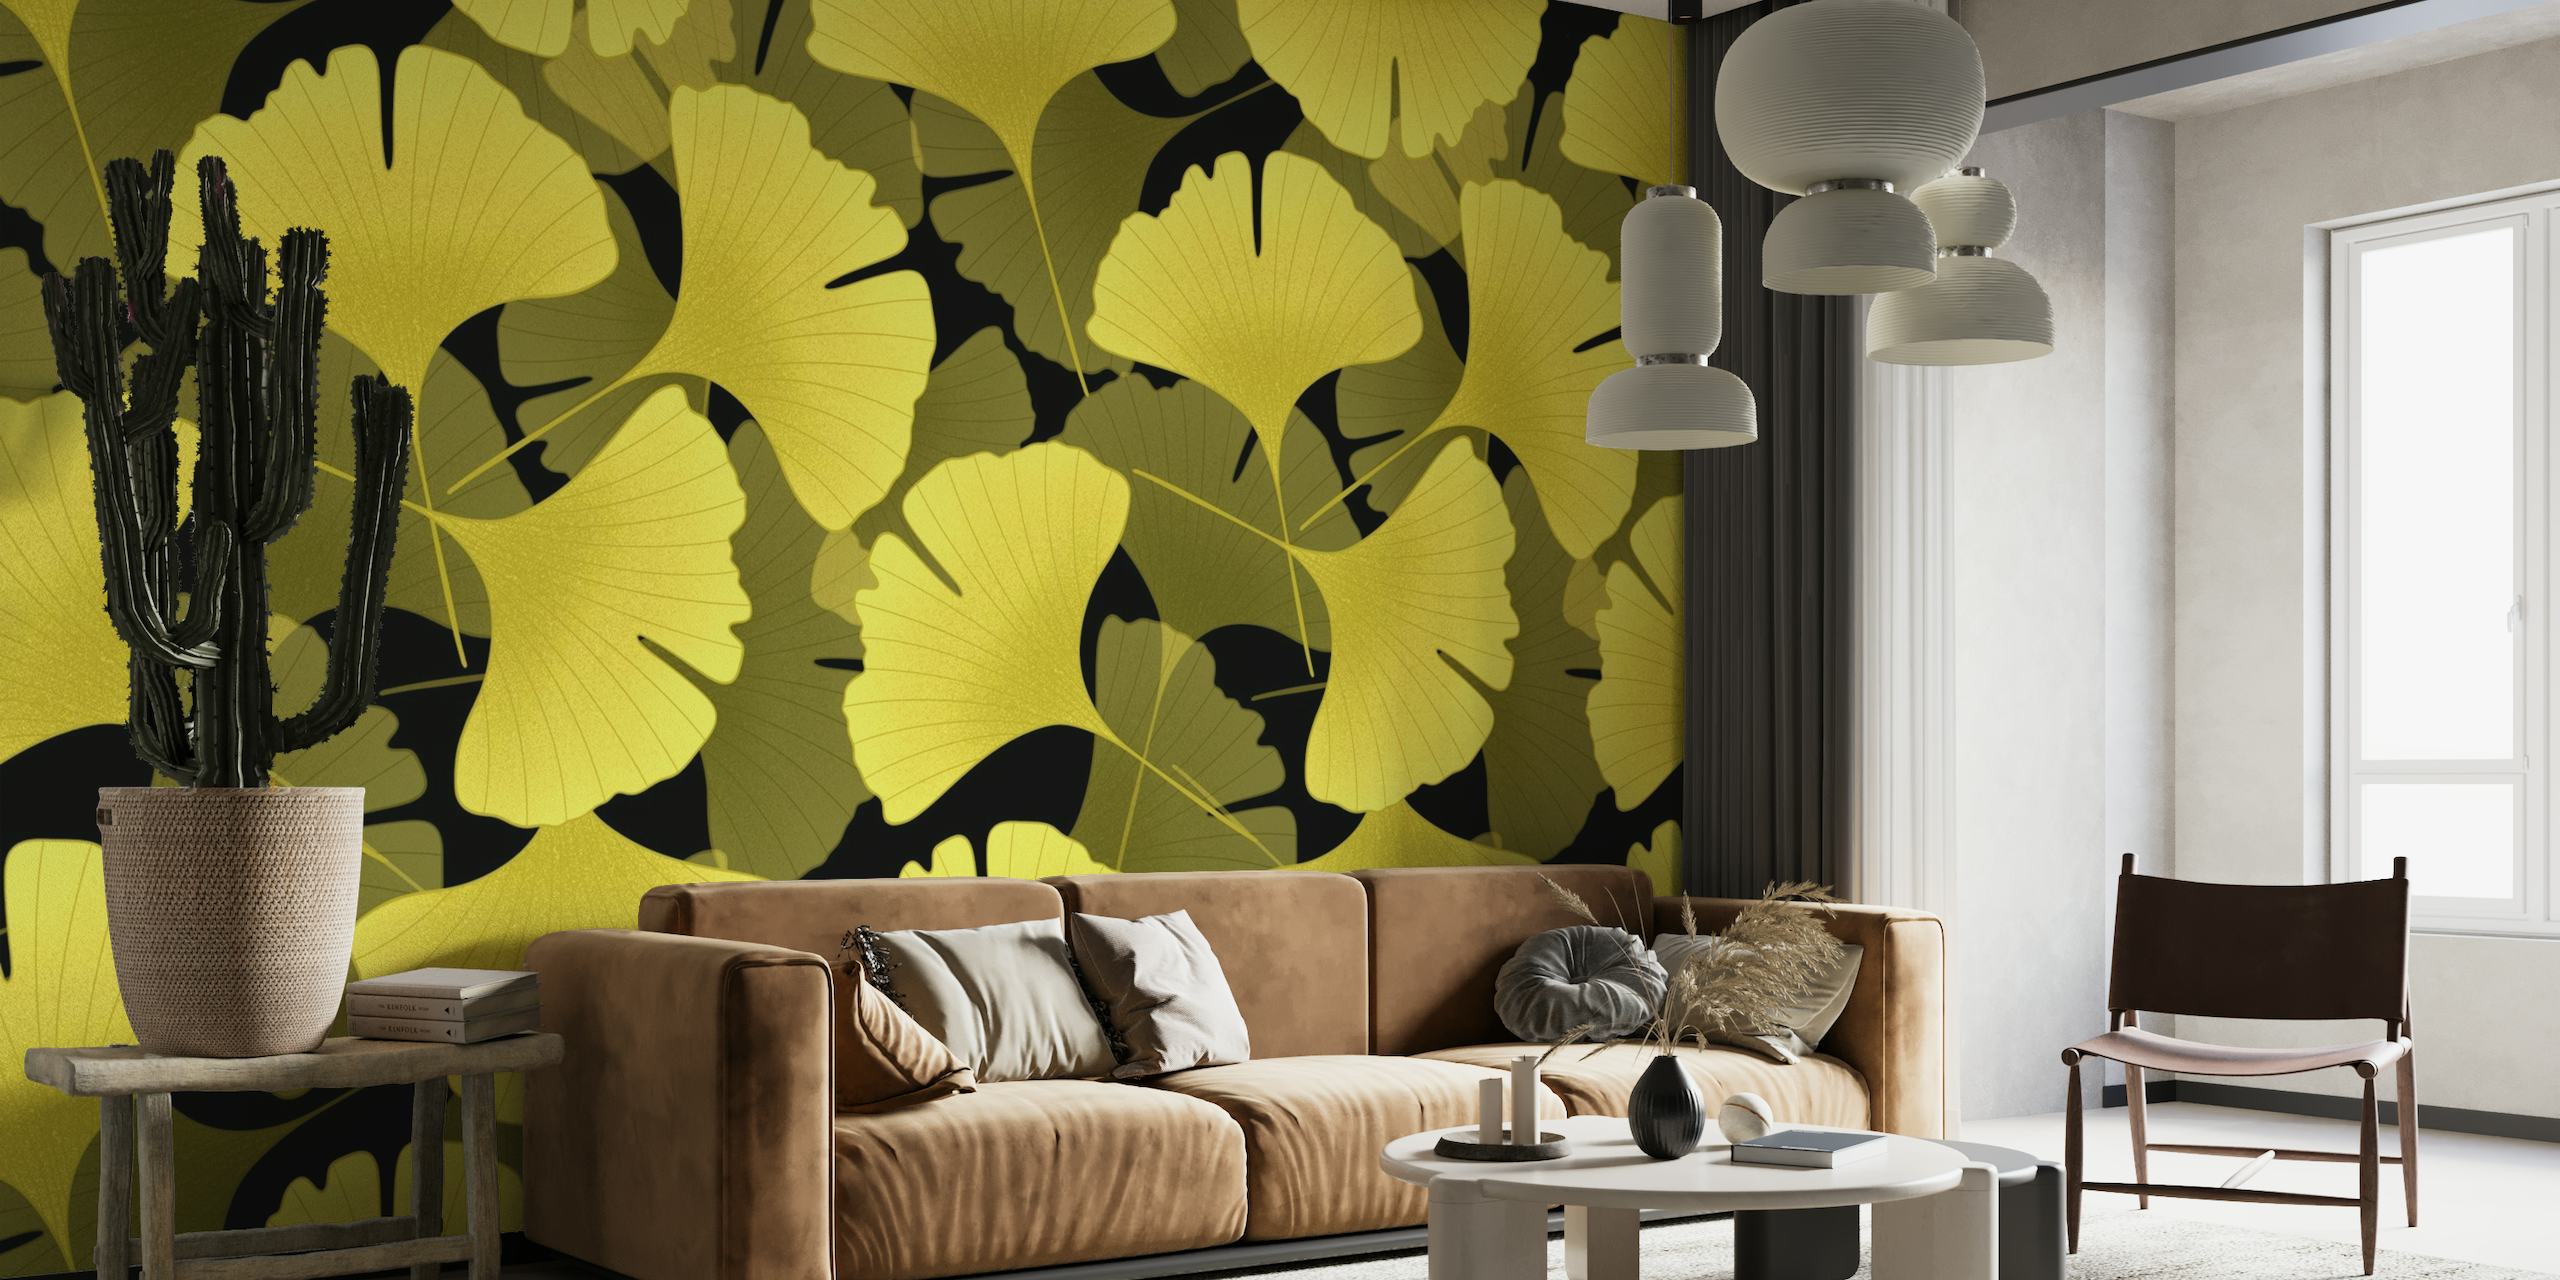 Ginkgo Biloba leaves pattern wall mural with golden yellow leaves on a dark background